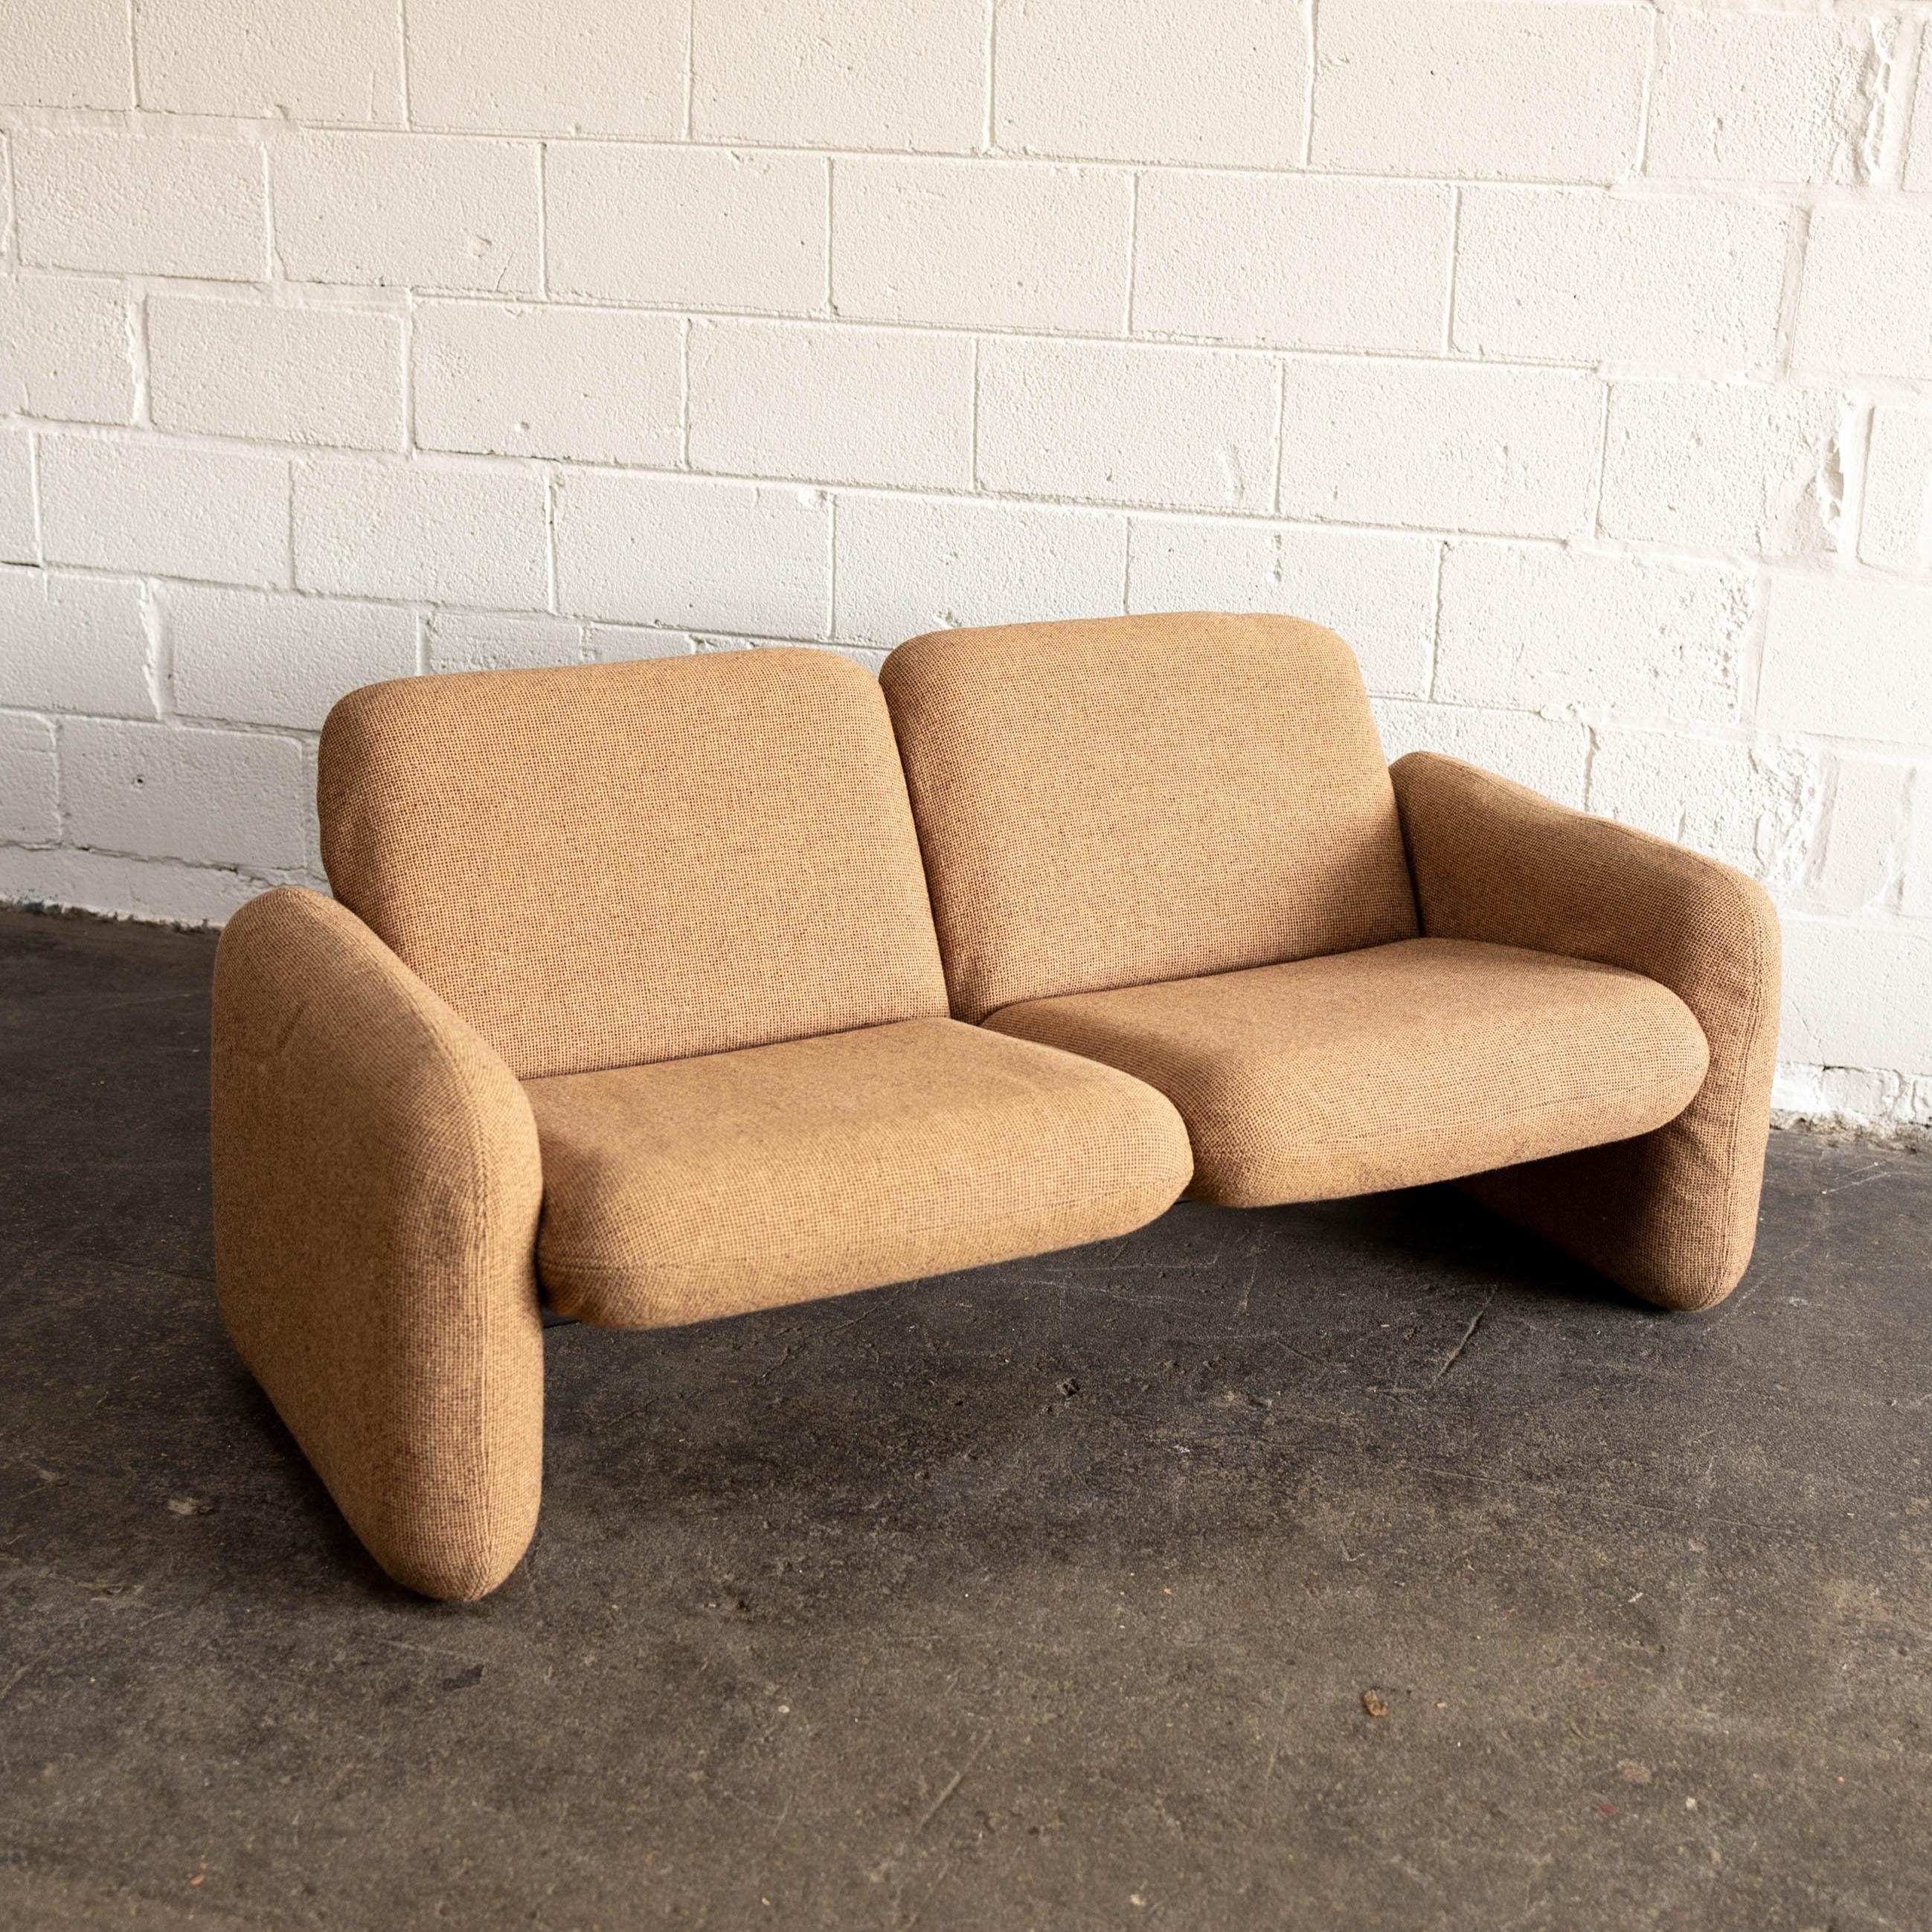 This piece features its' original brown tweed upholstery. When the design was first created, it was revolutionary in the way that it used injection-molded foam to create modular designs.